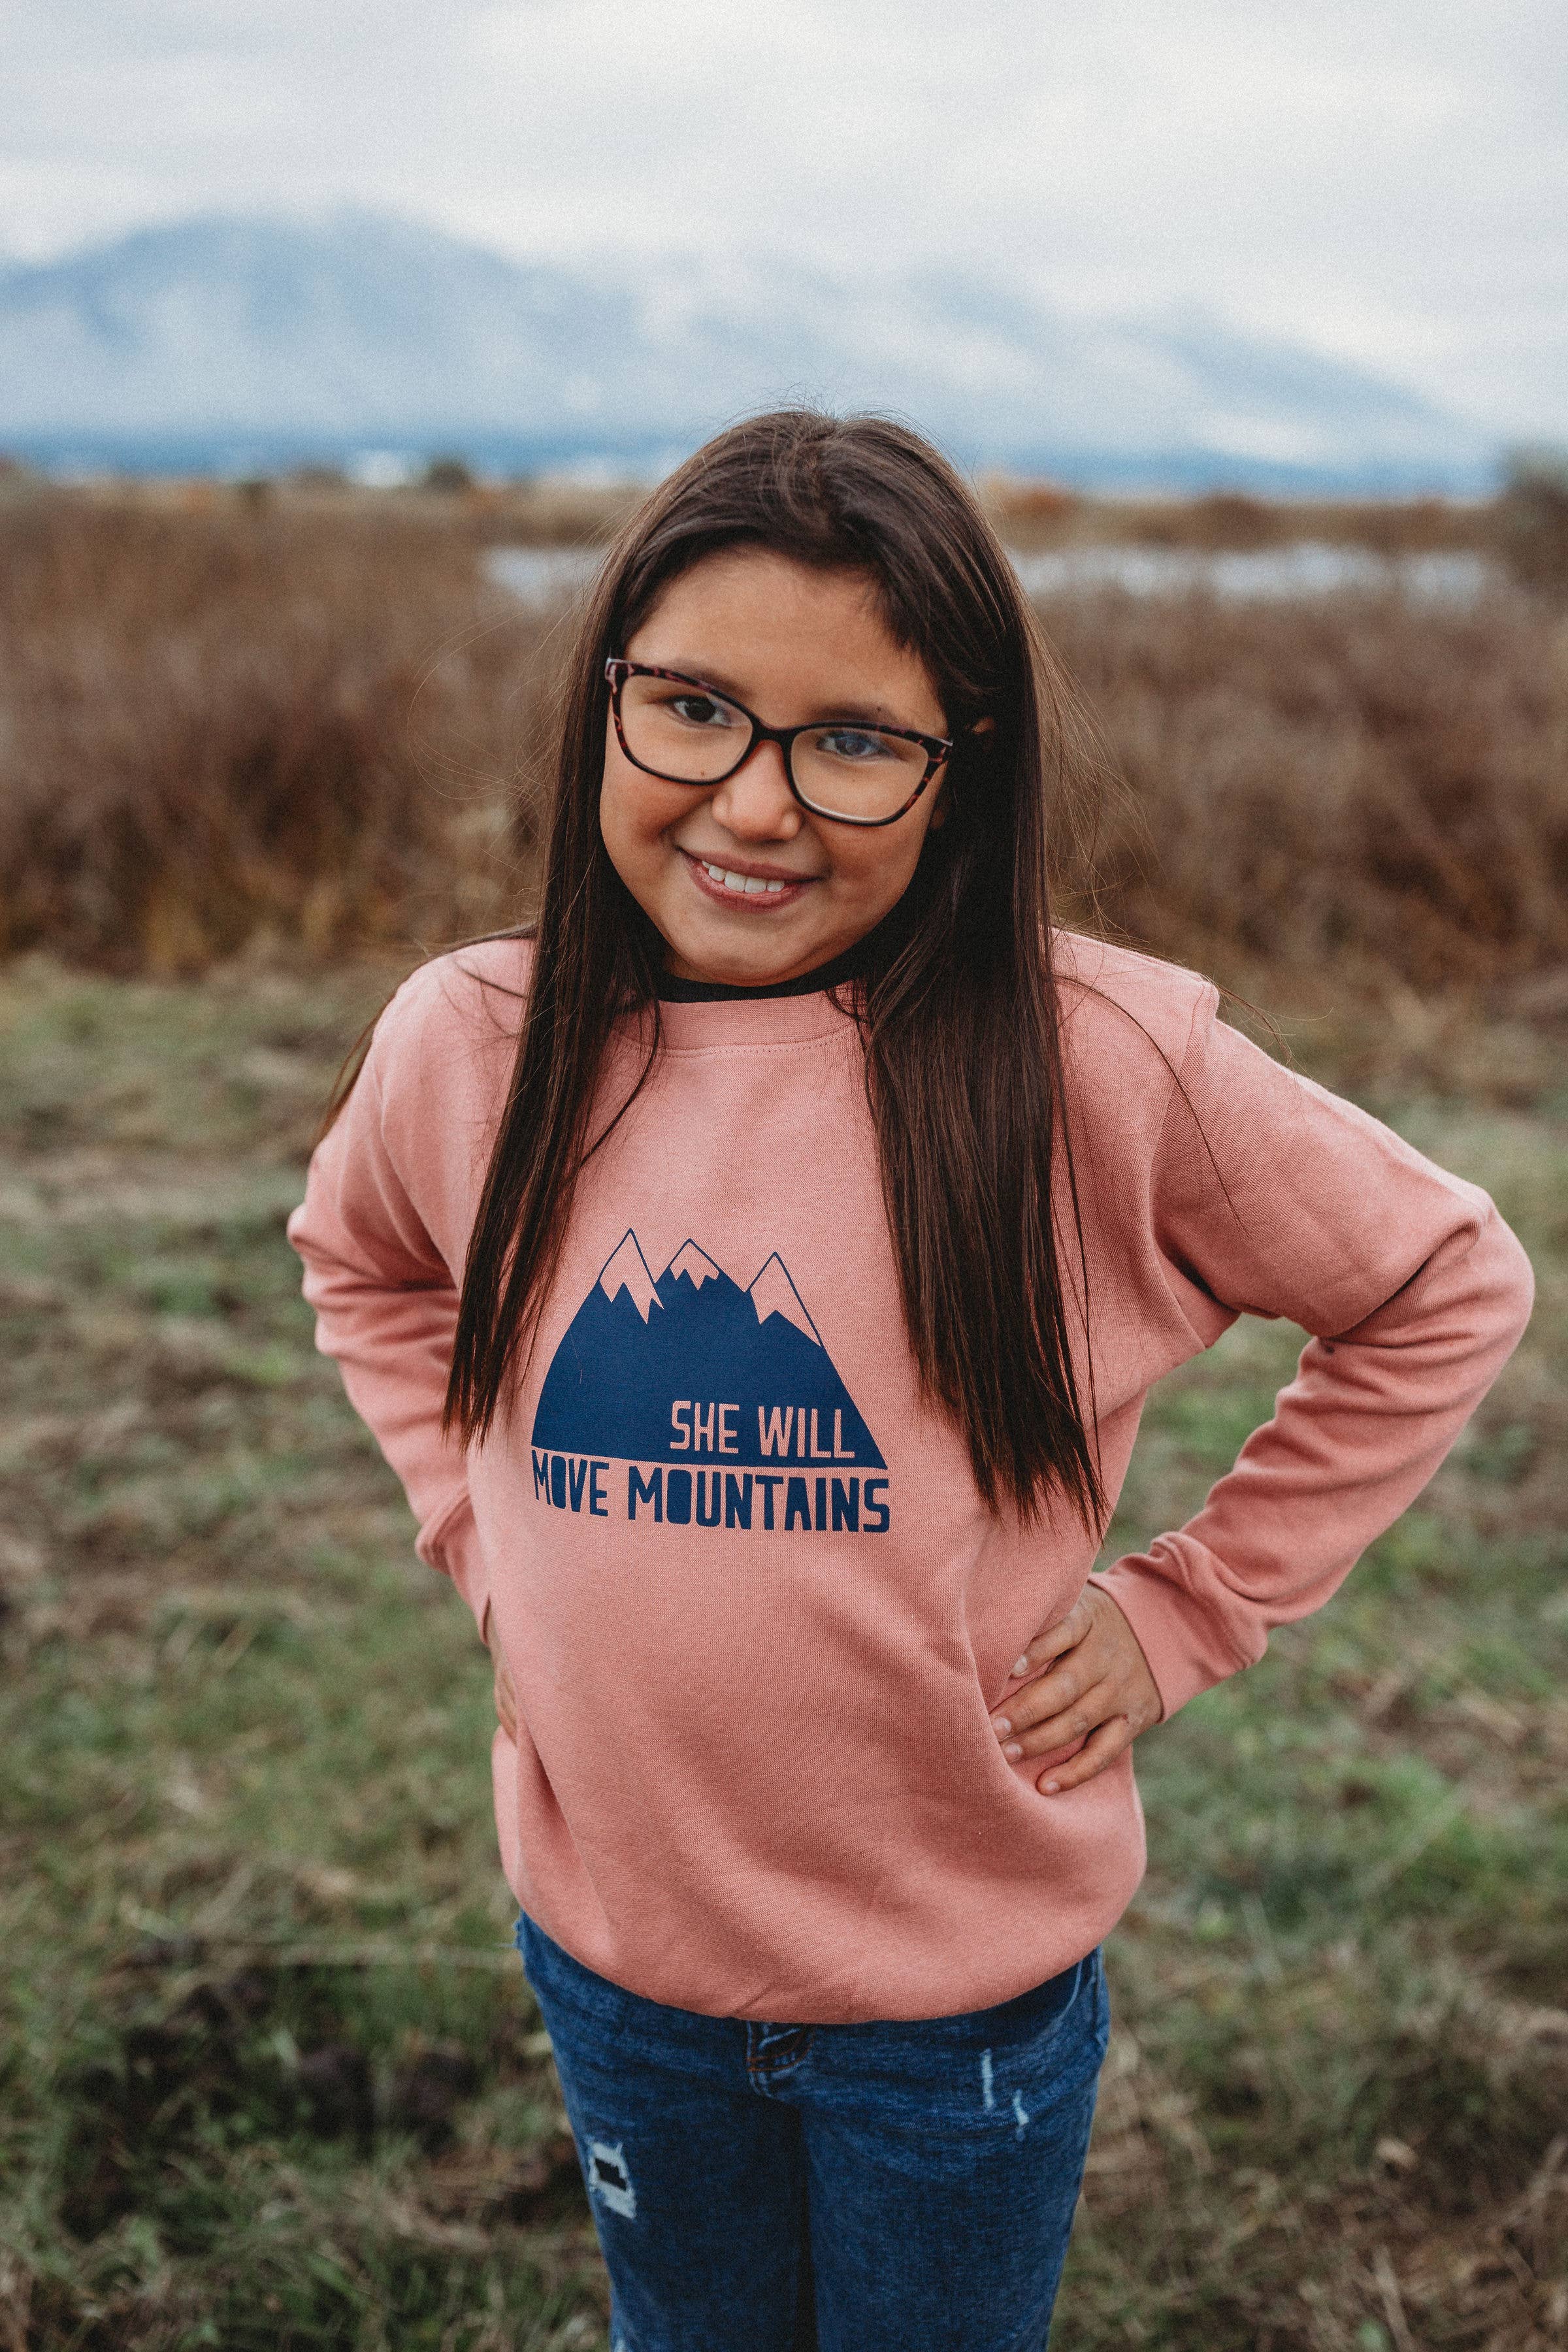 She Will Move Mountains Kids Crew: YM / Pink w/ Blue Font